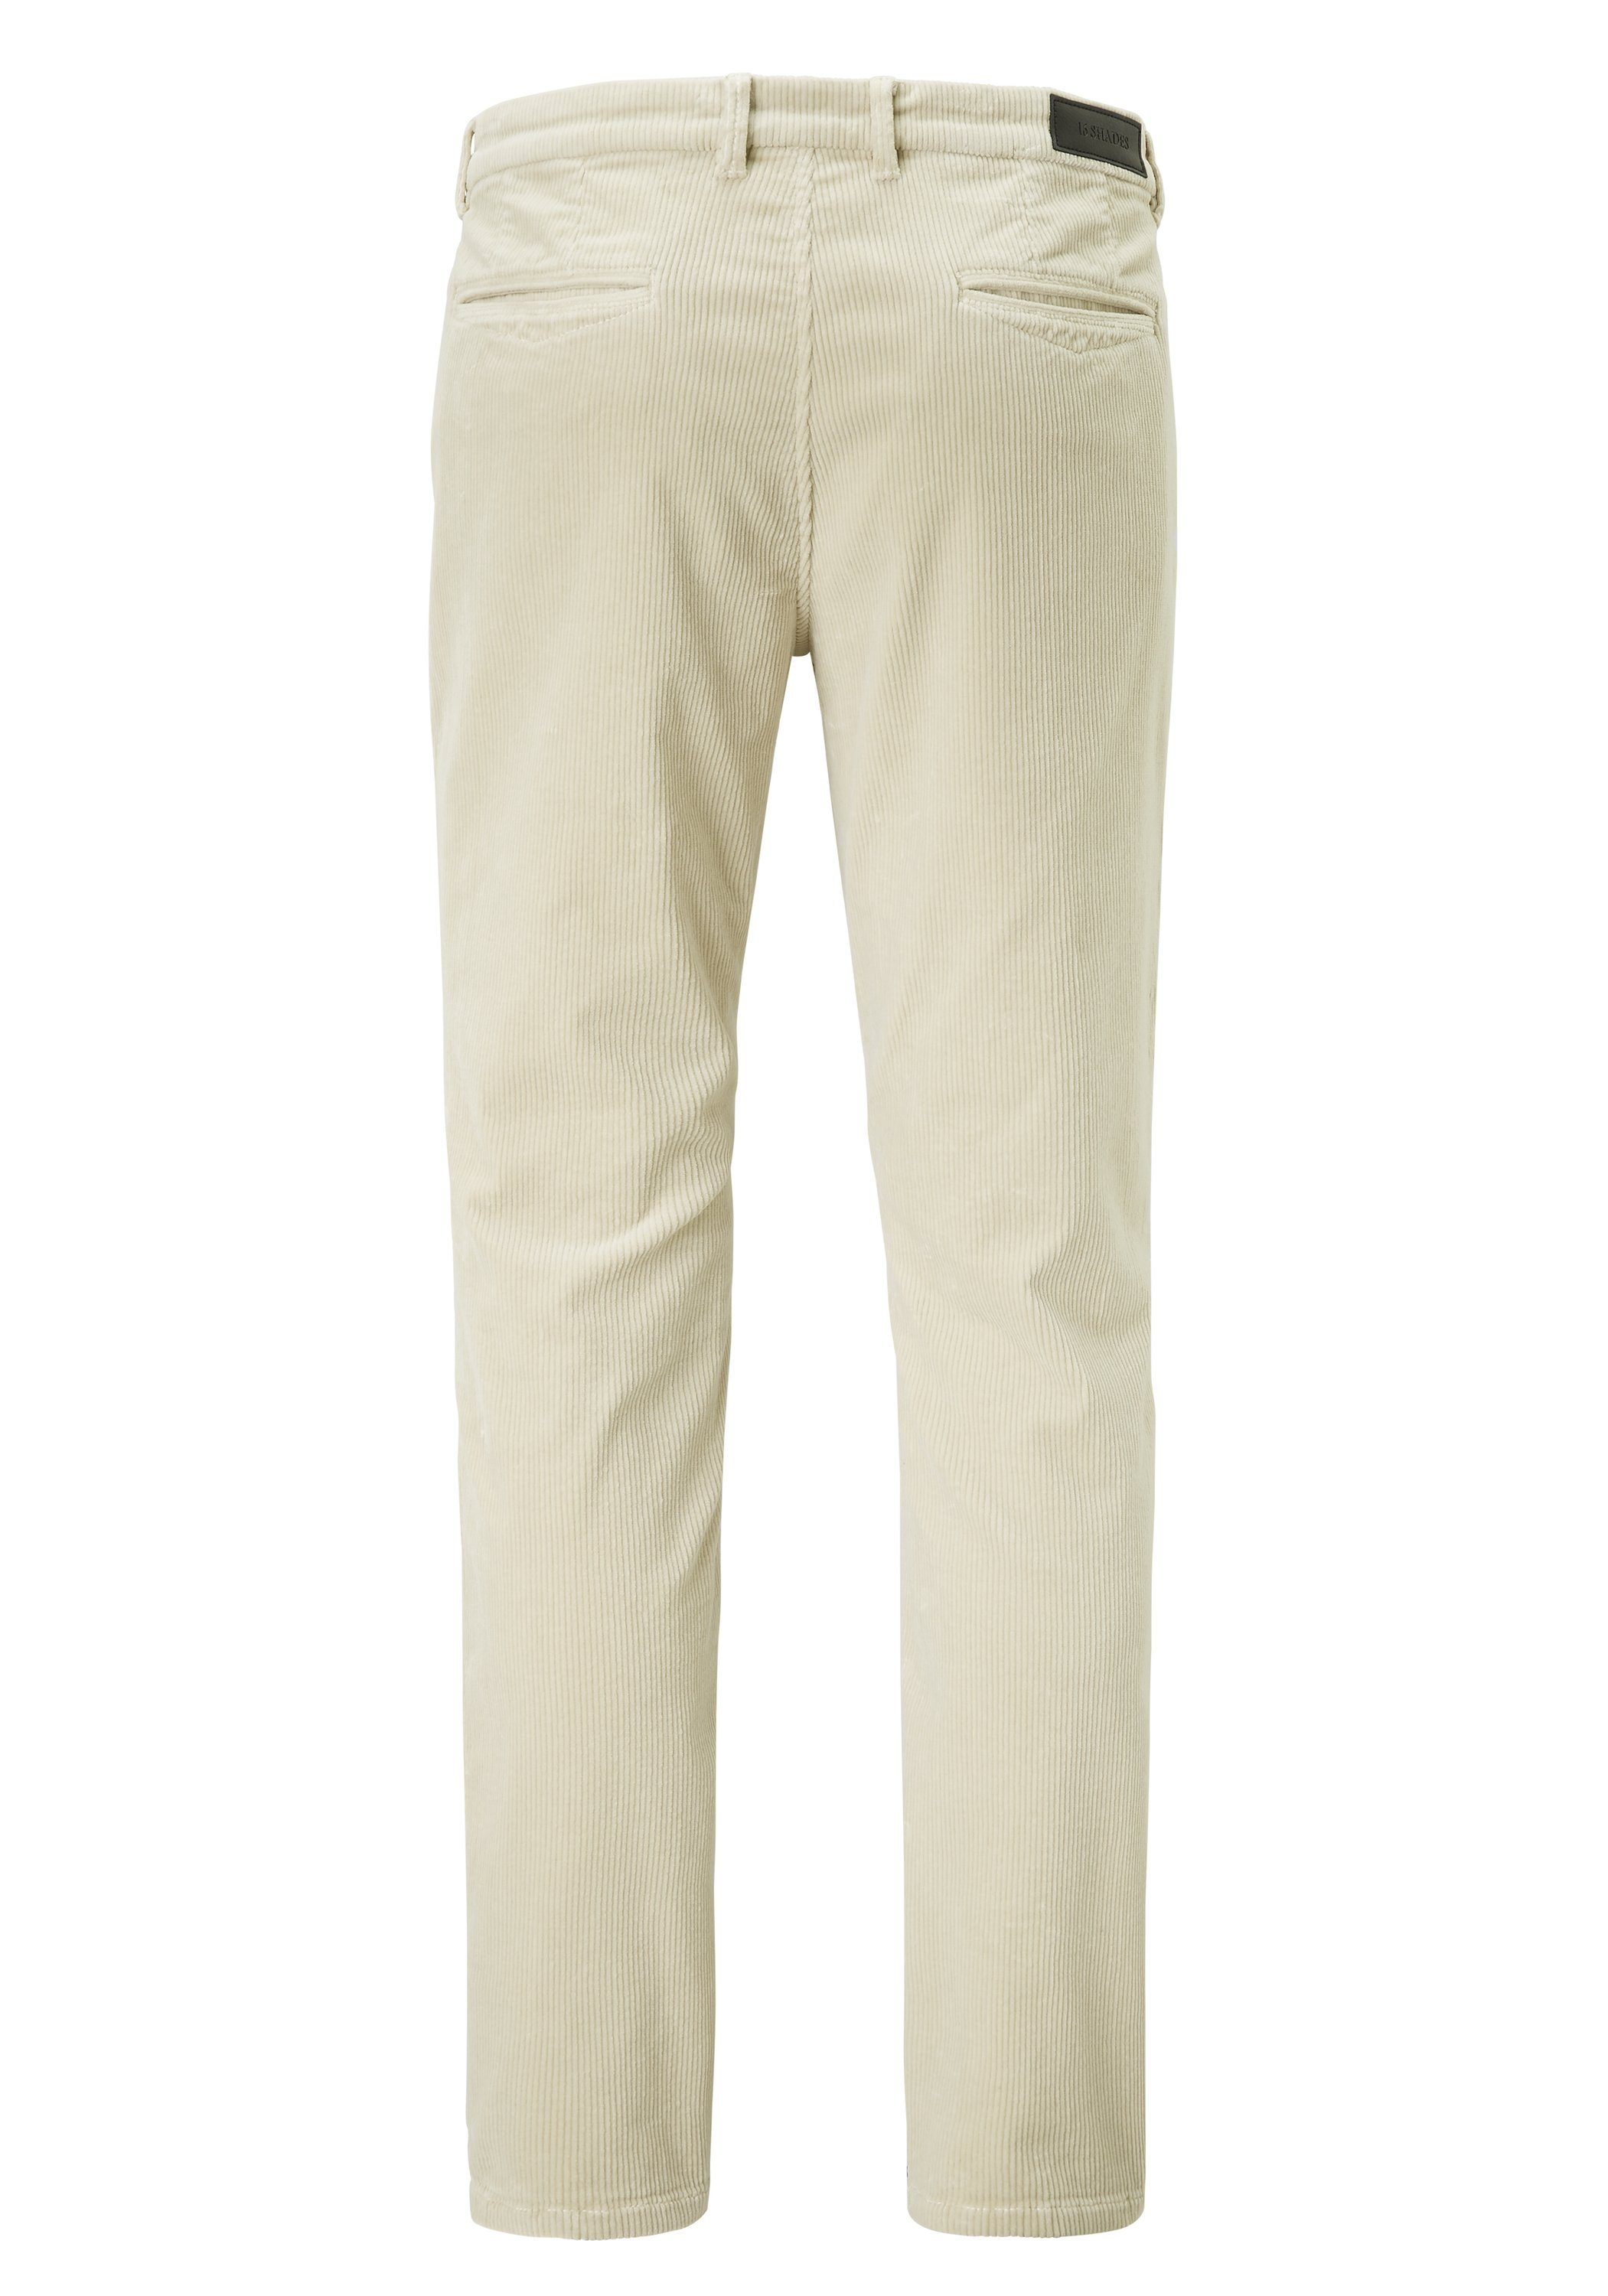 Edition Shades Fit Tapered Eggshell der Brandon 16 aus Redpoint Chinohose Chino